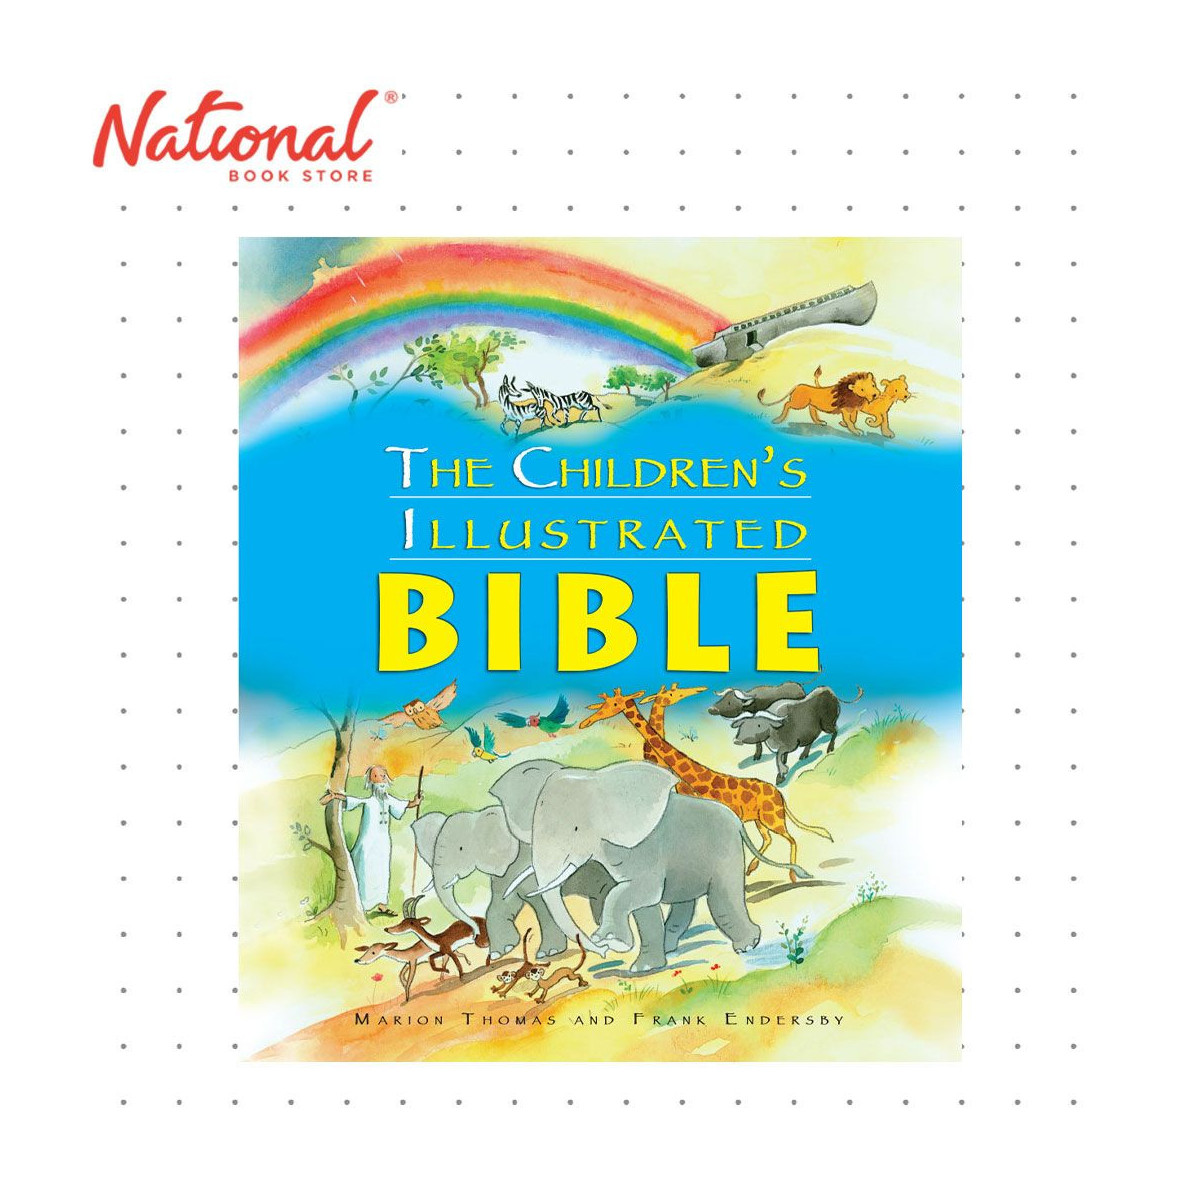 childrens illustrated bible pdf free download